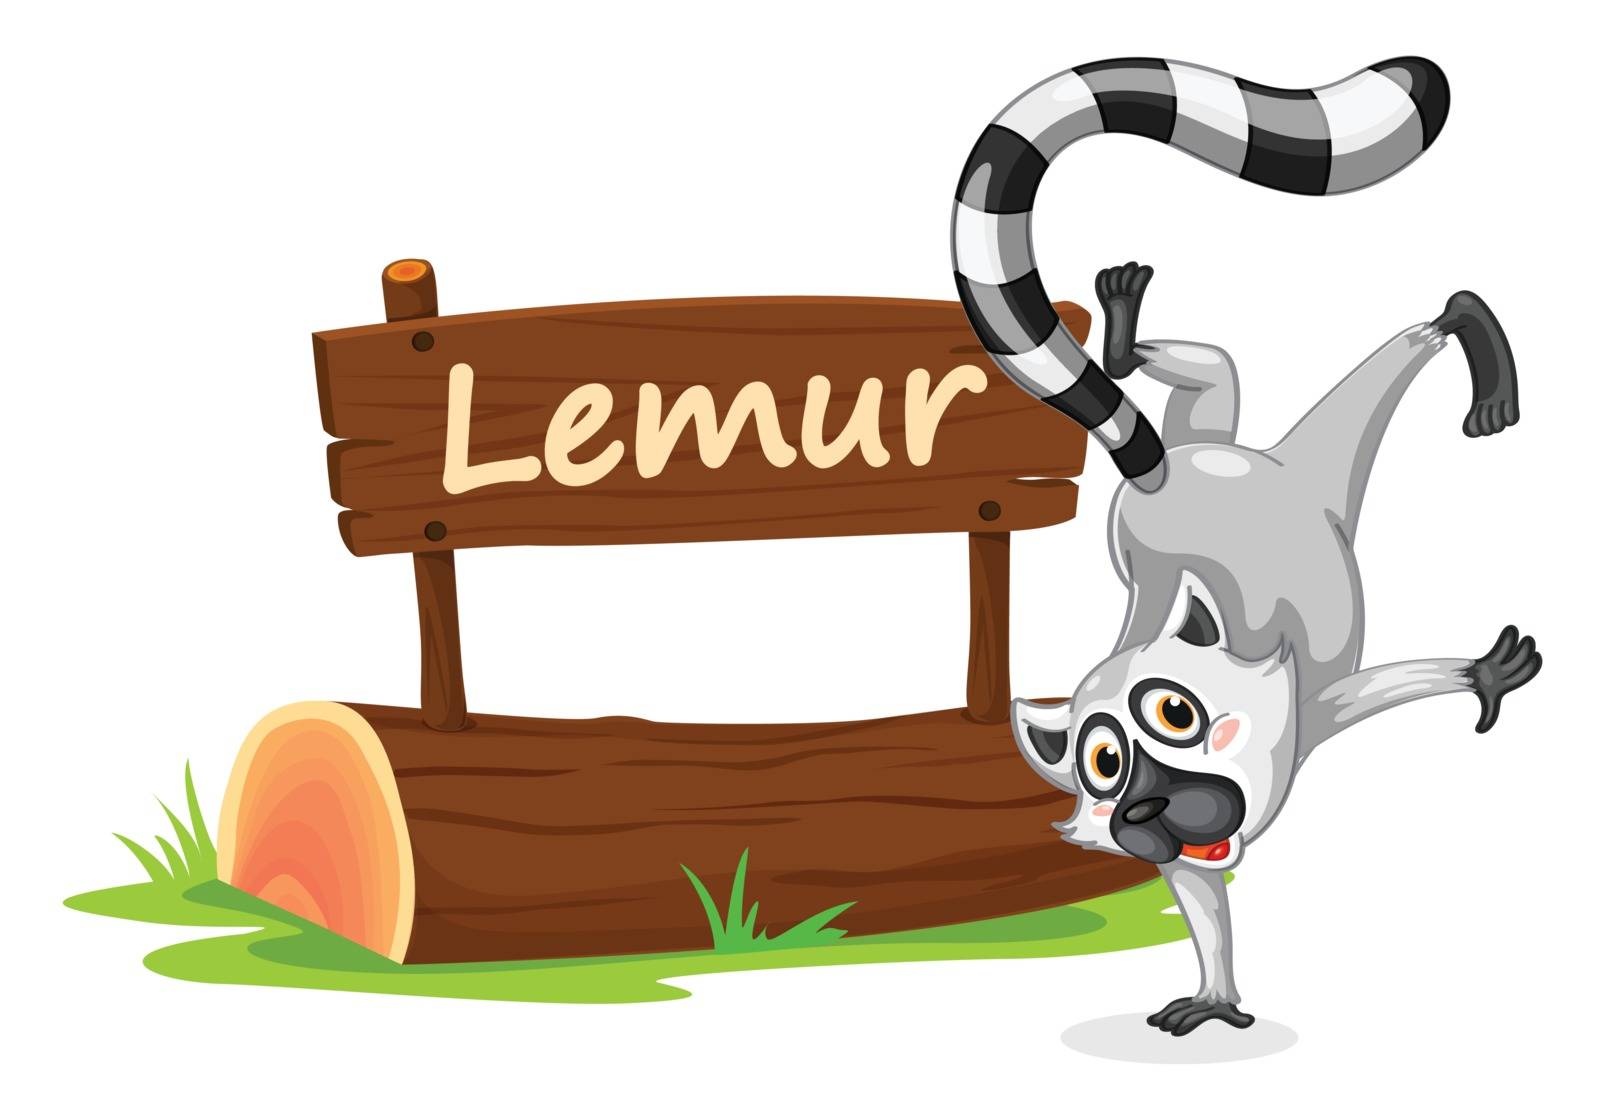 lemur and name plate by iimages